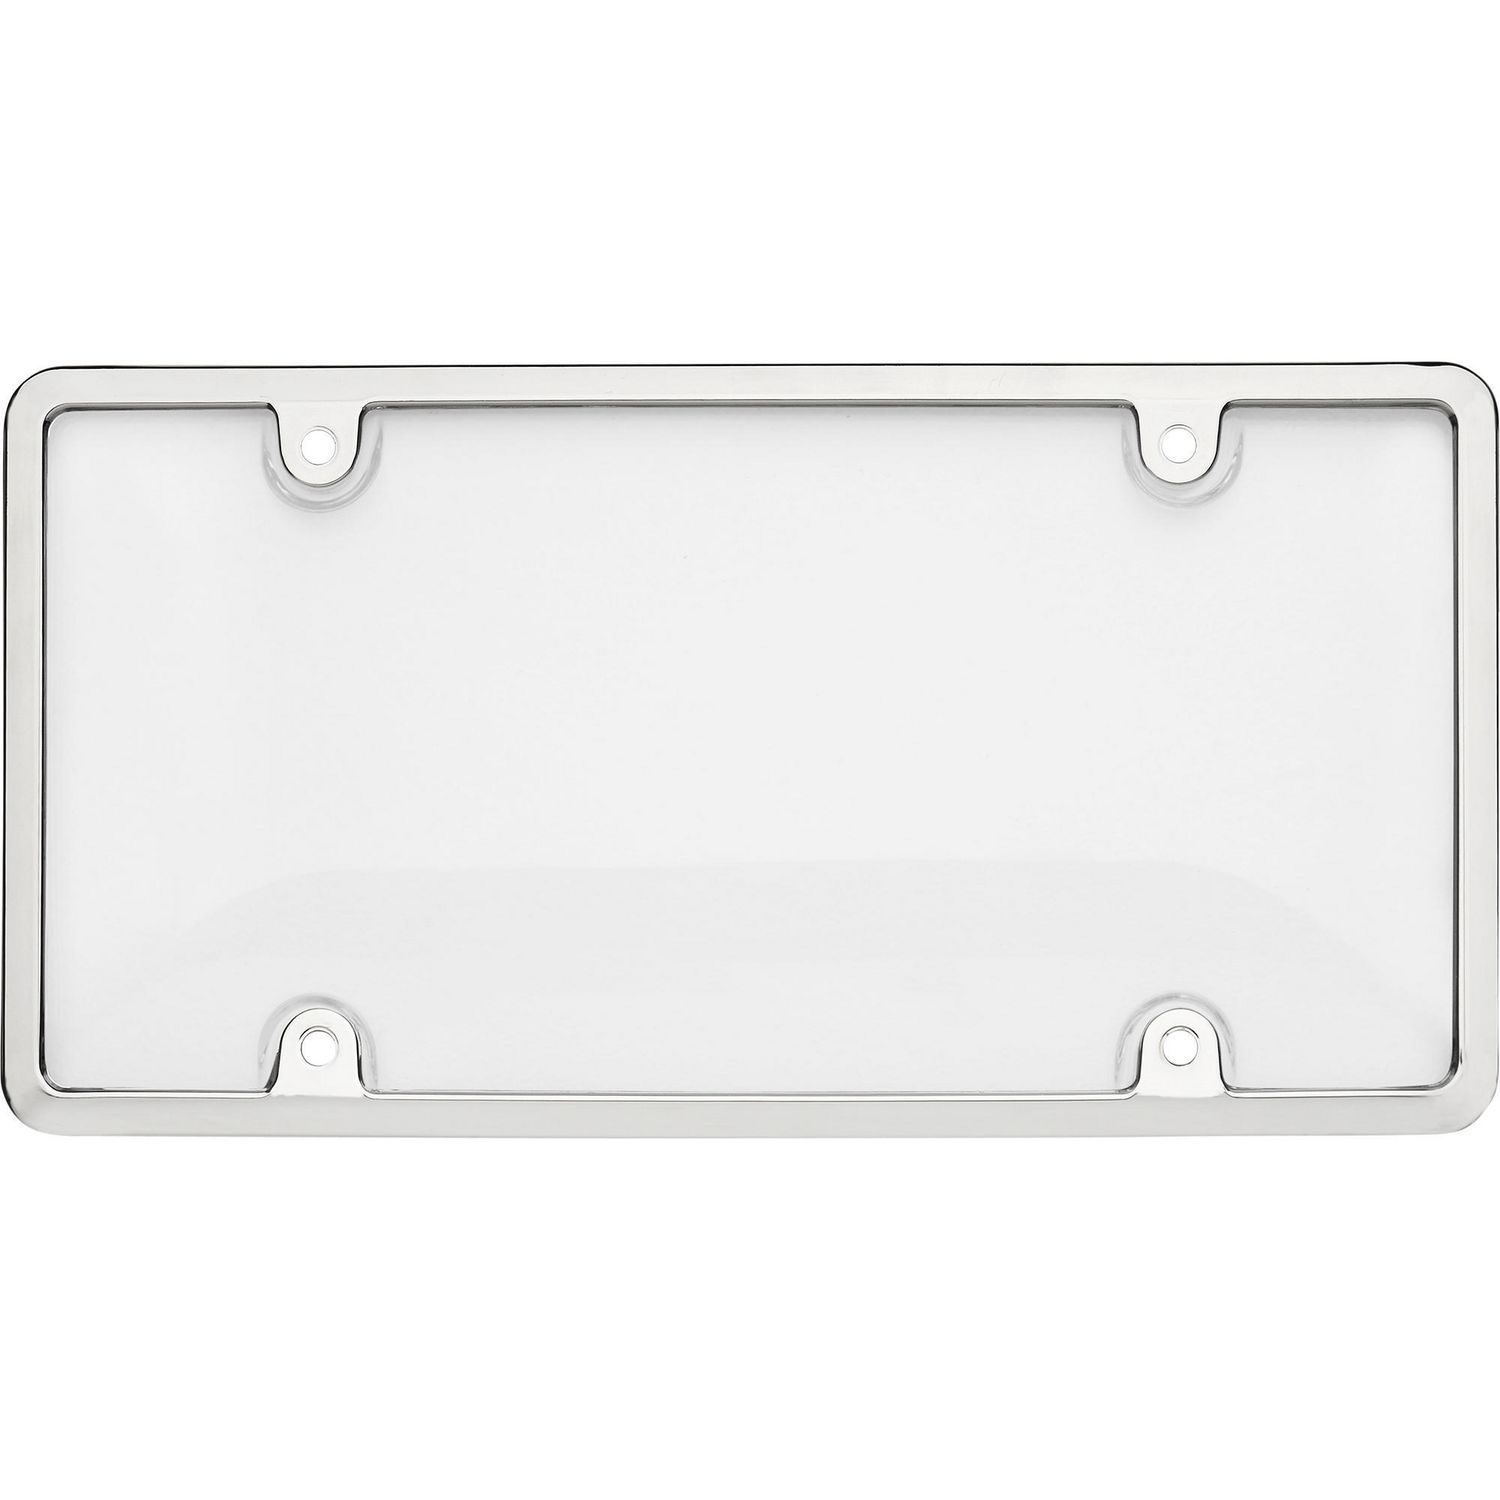 Cruiser Accessories 62051 Tuf Combo License Plate Frame and Bubble ...